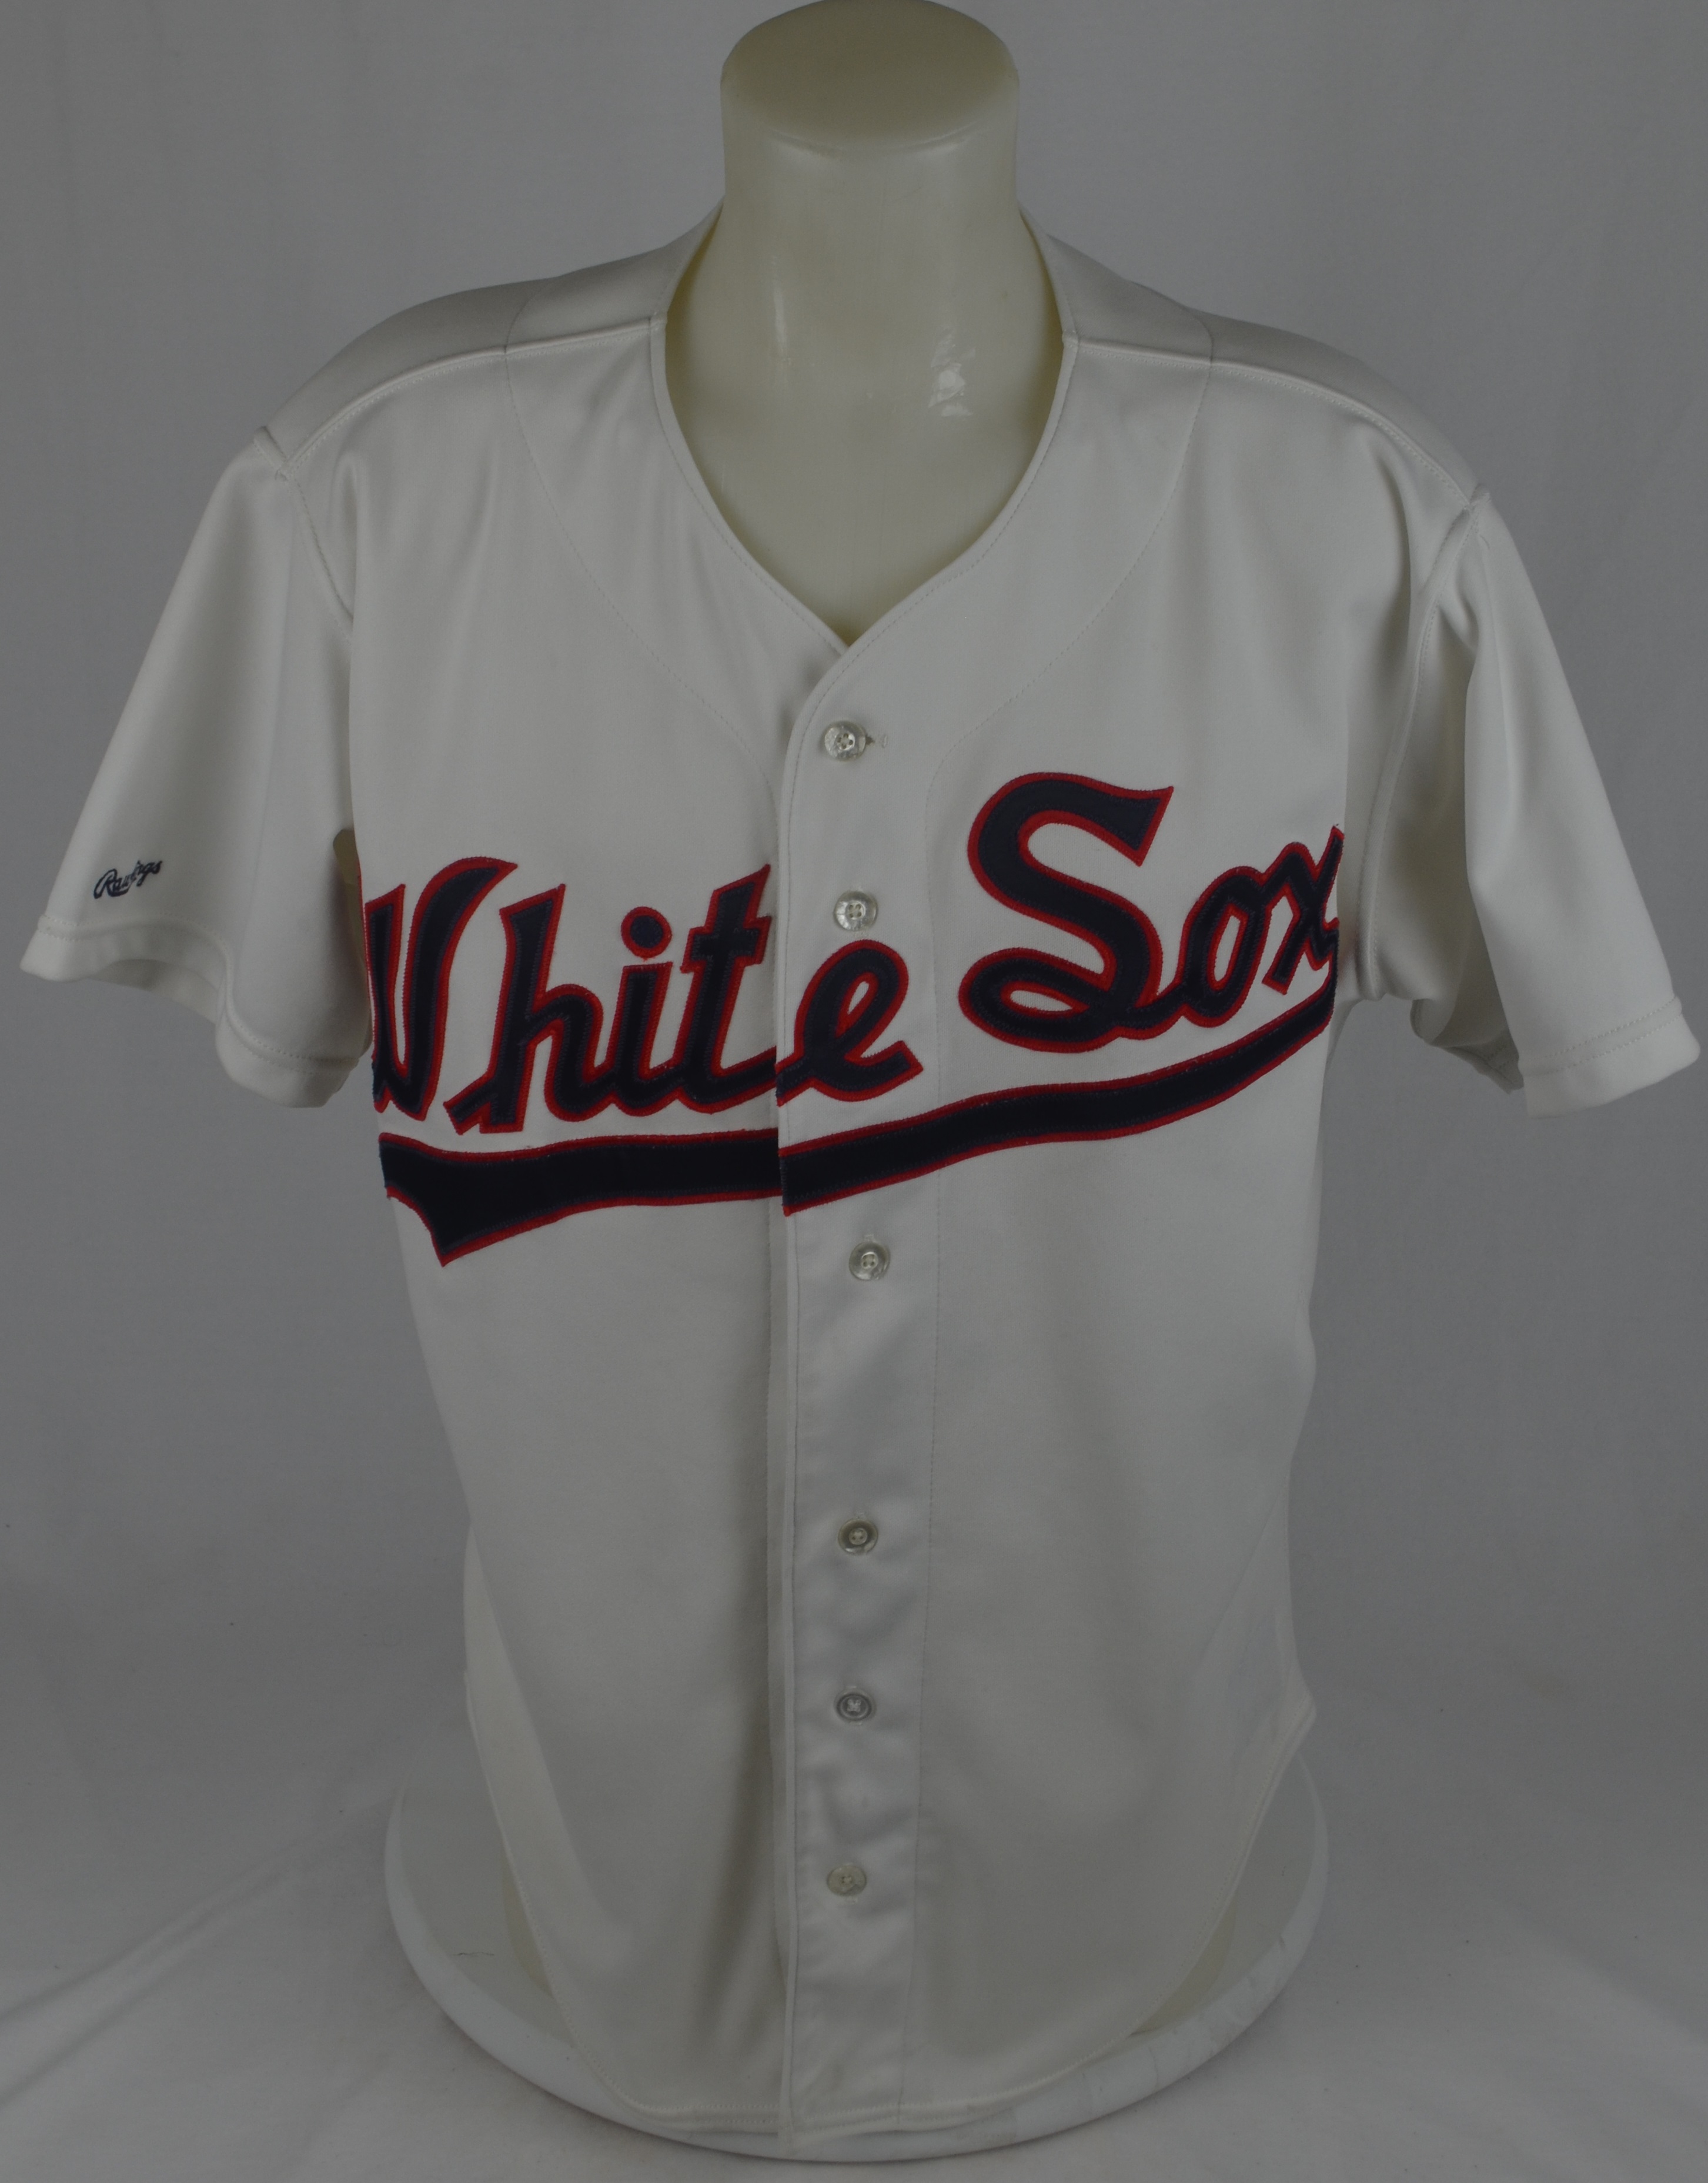 Frank Thomas Chicago White Sox Jersey Old Stock with tags